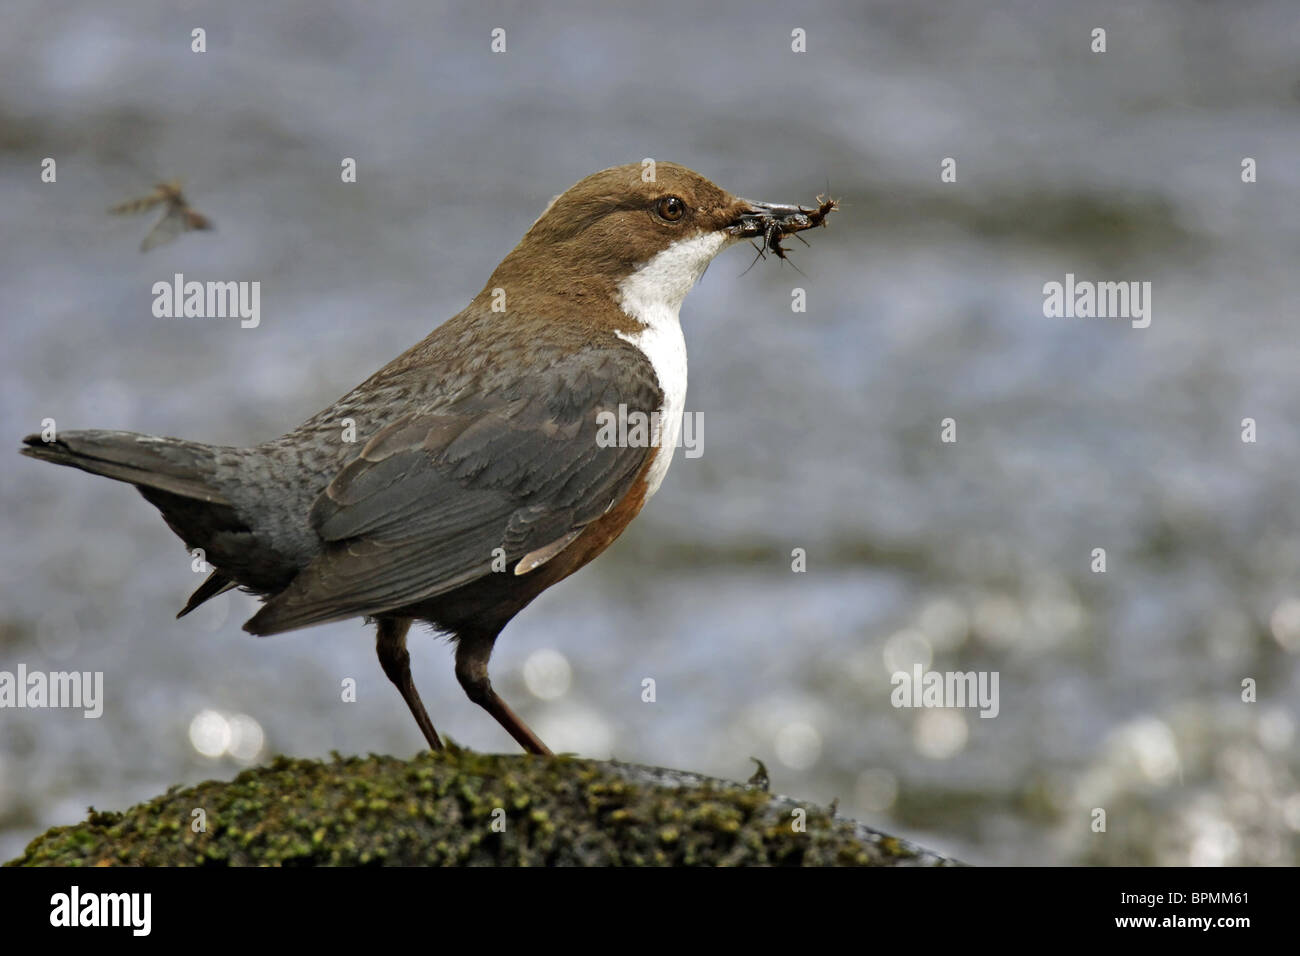 Dipper (Cinclus cinclus), standing on a stone with its beak full of insects for its young. Stock Photo